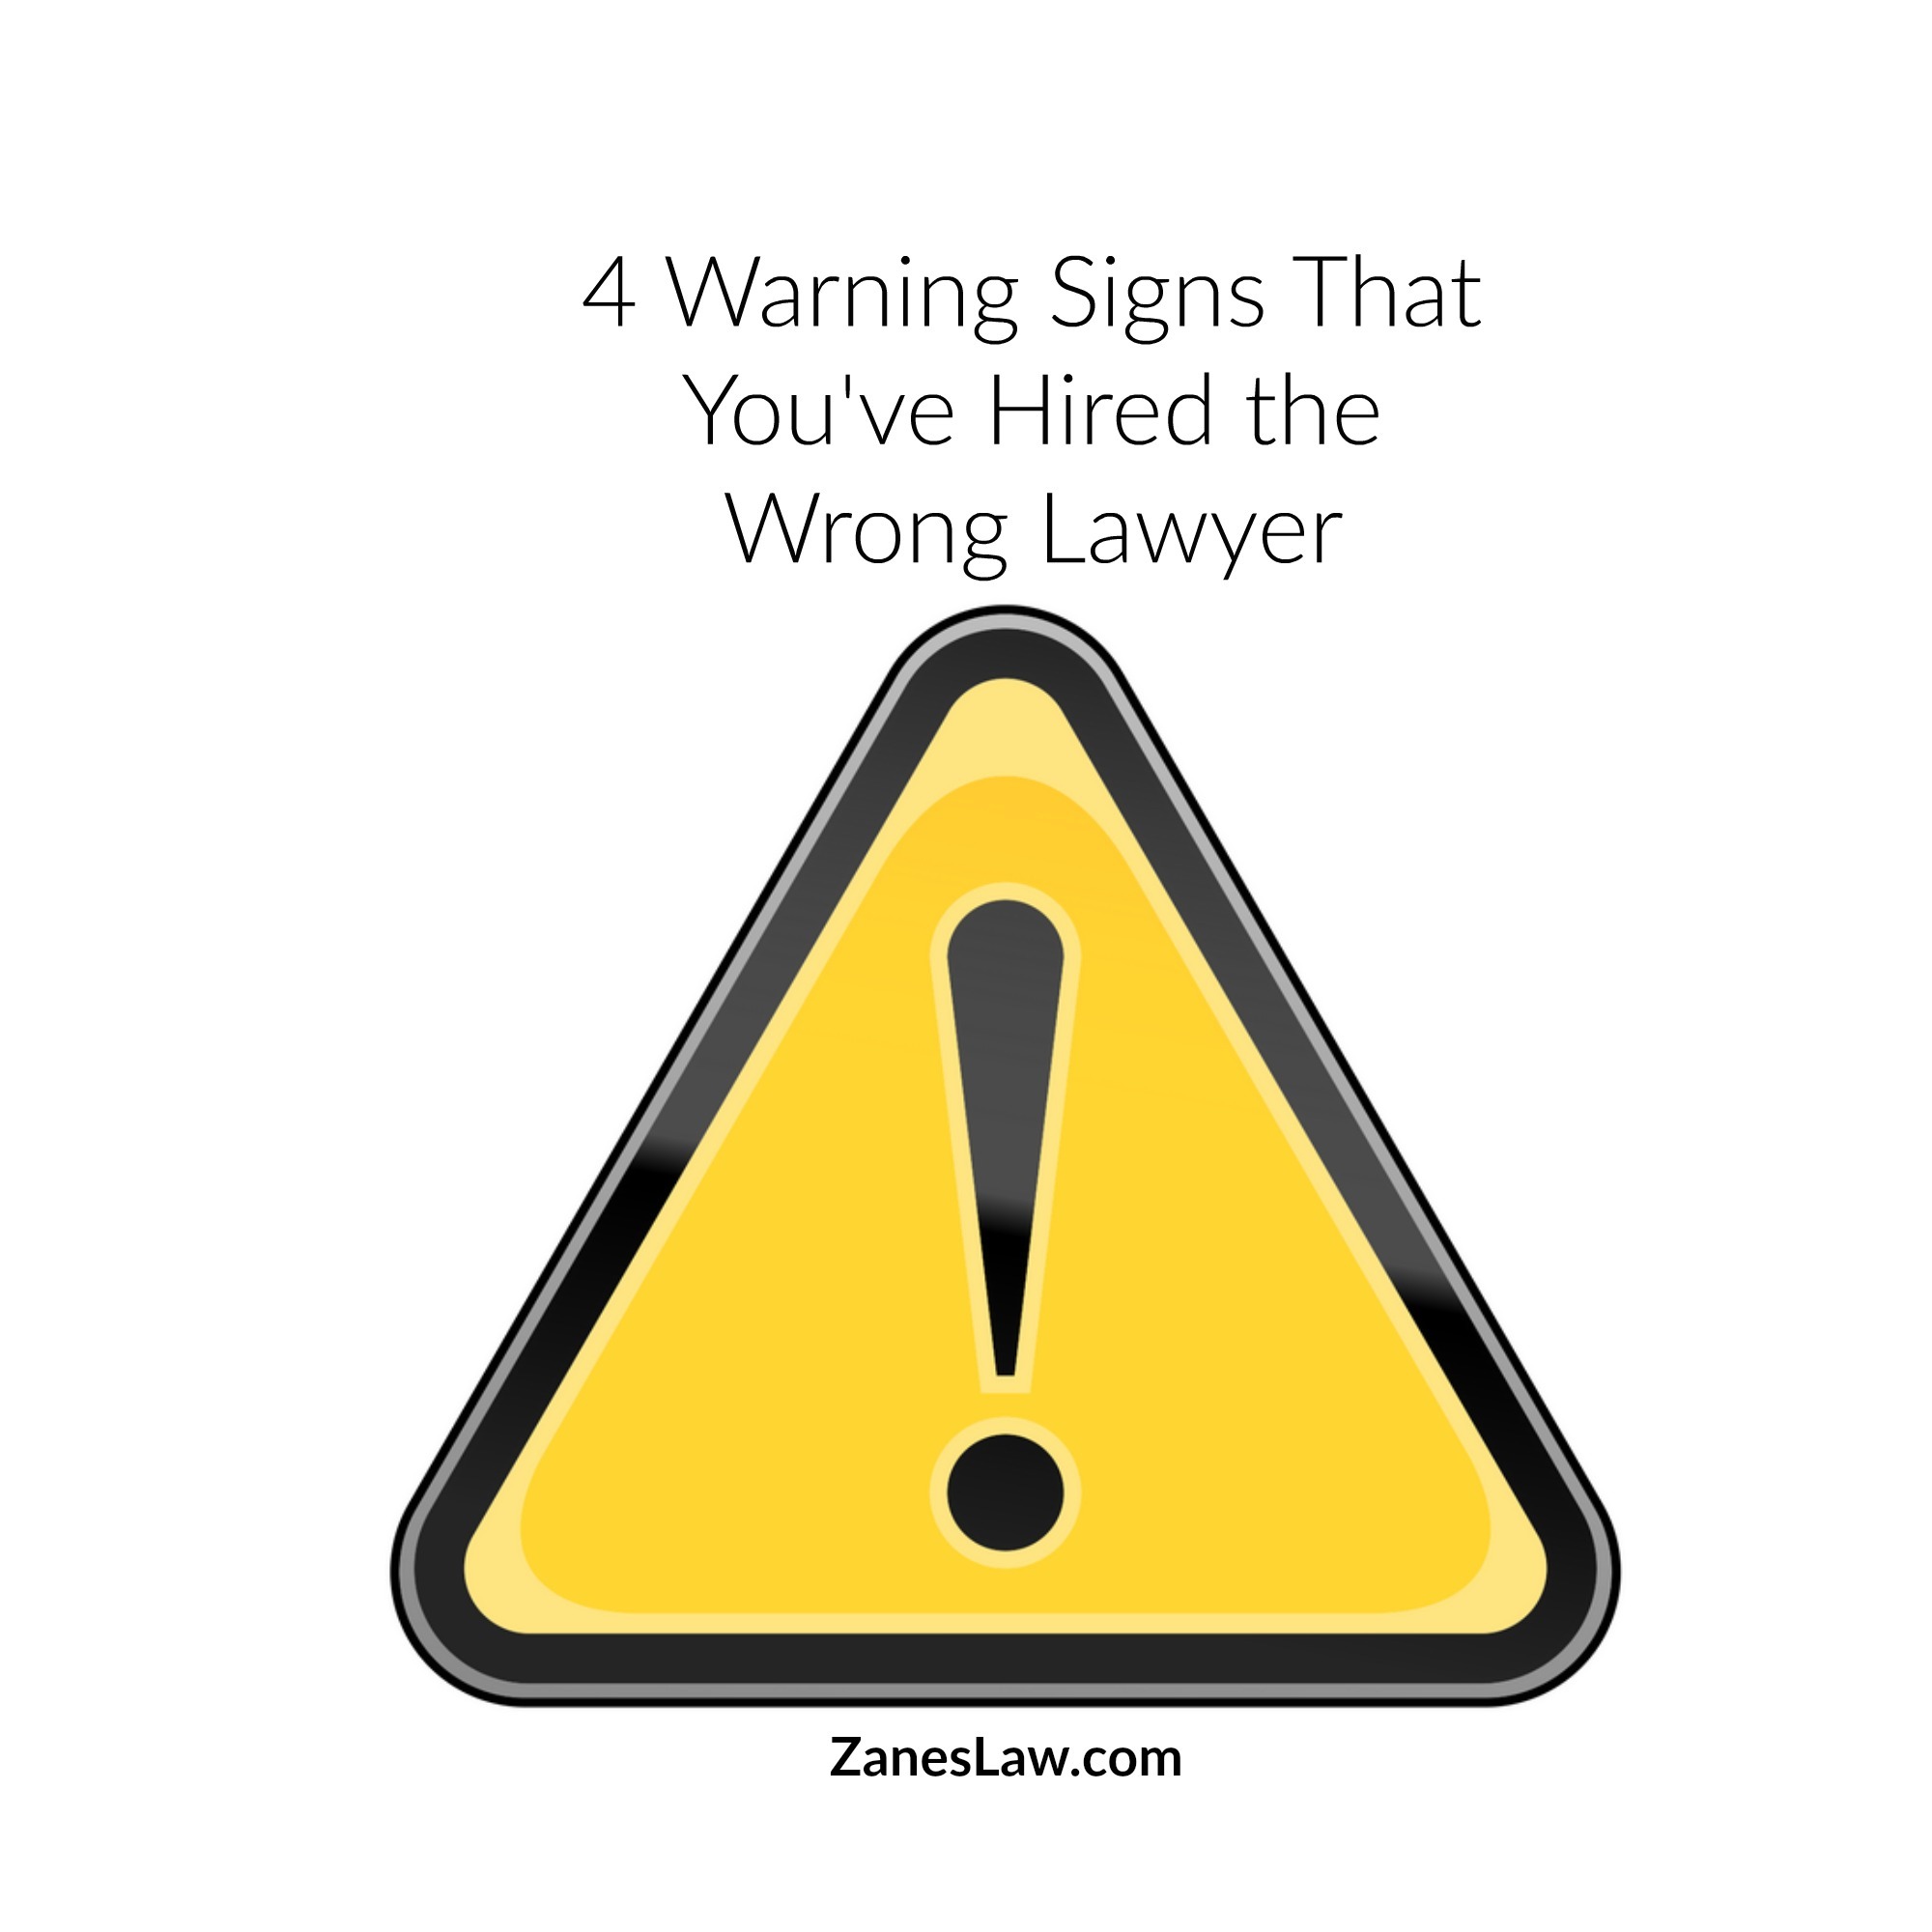 4 Warning Signs That You’ve Hired the Wrong Lawyer